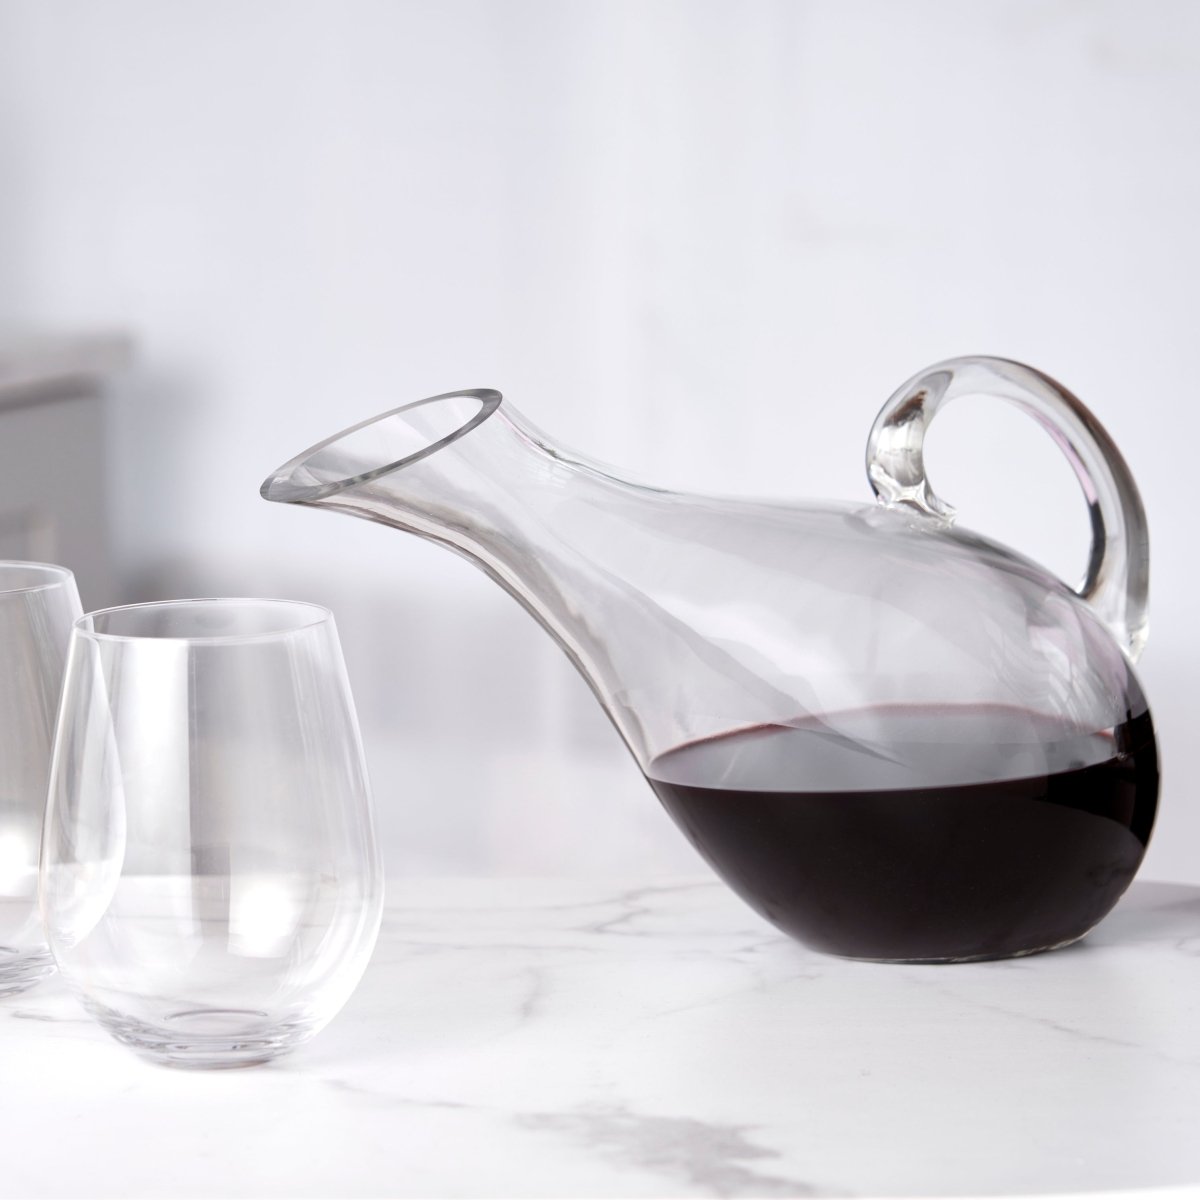 Hand-Blown Glass Broad Bowl Wine Decanter with Handle - 53 oz